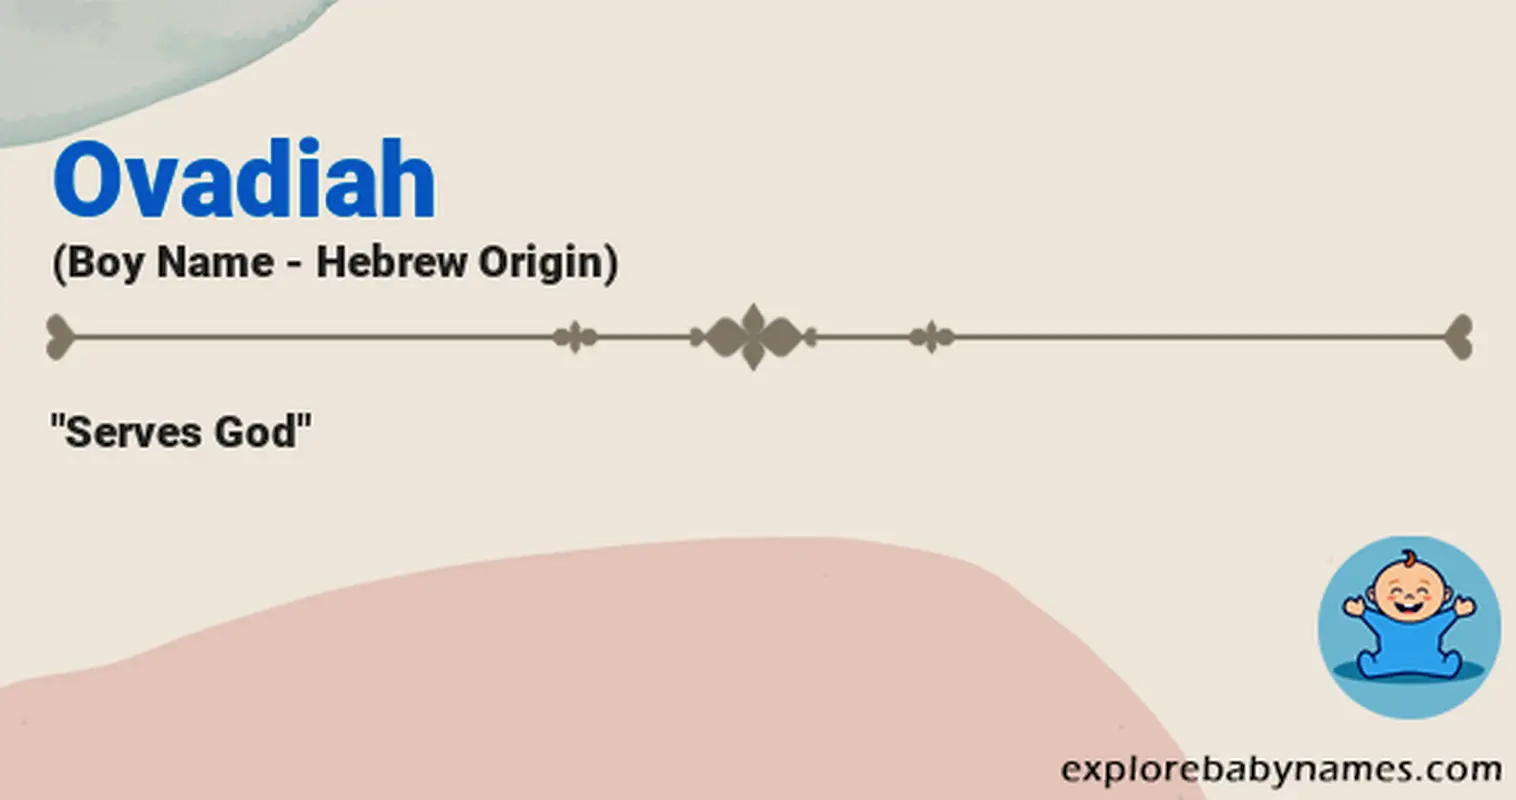 Meaning of Ovadiah